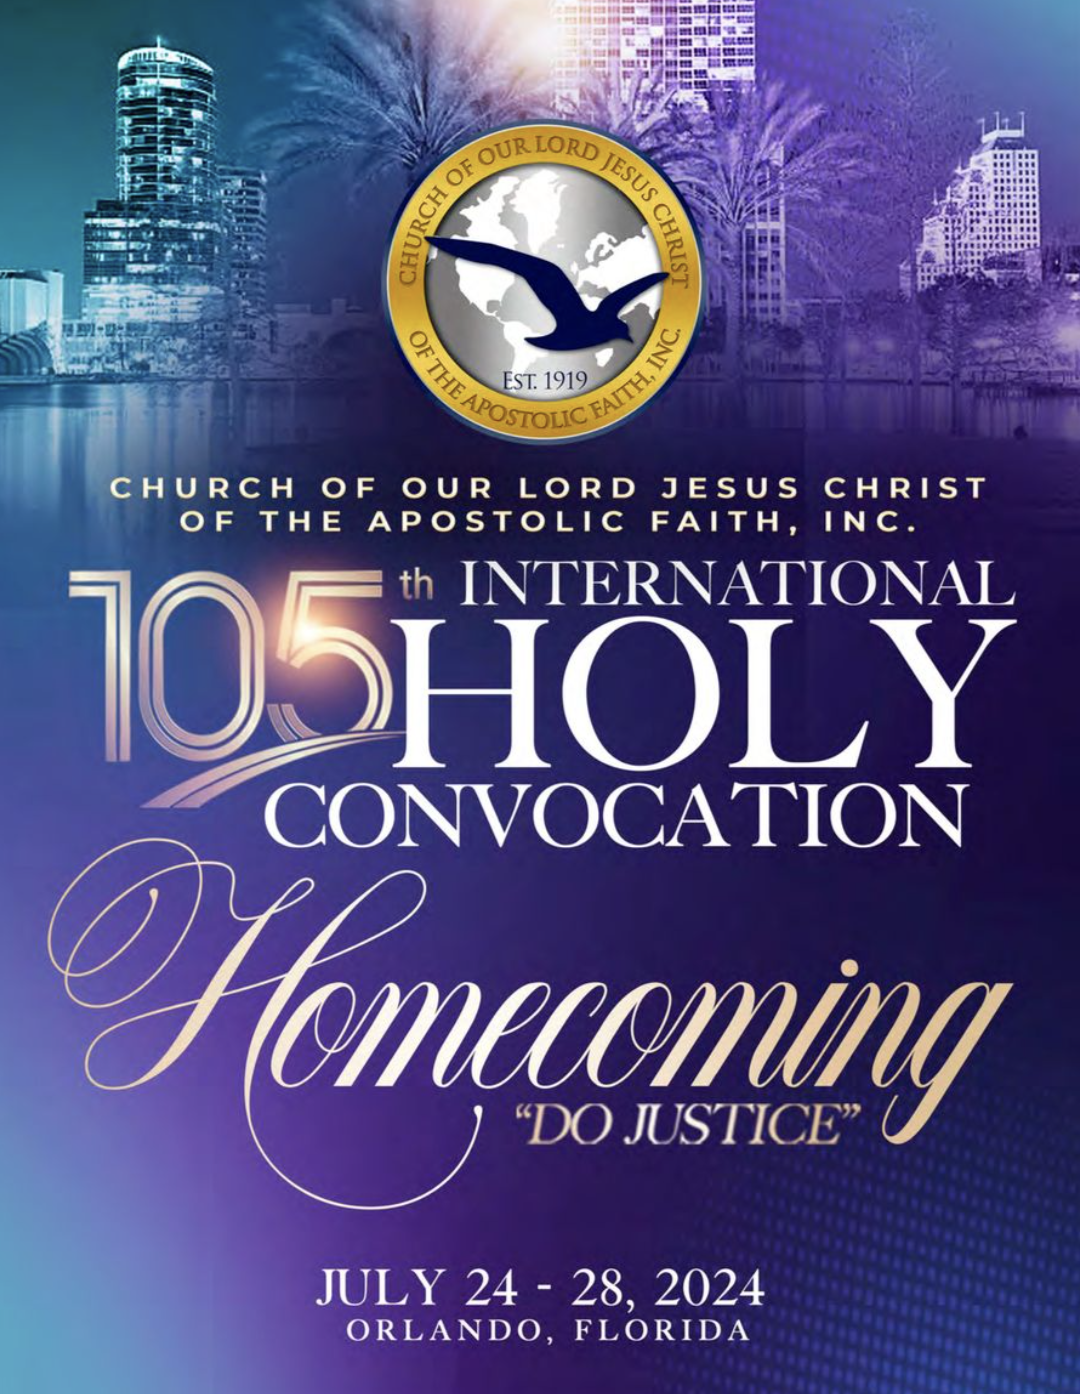 105th Holy Convocation